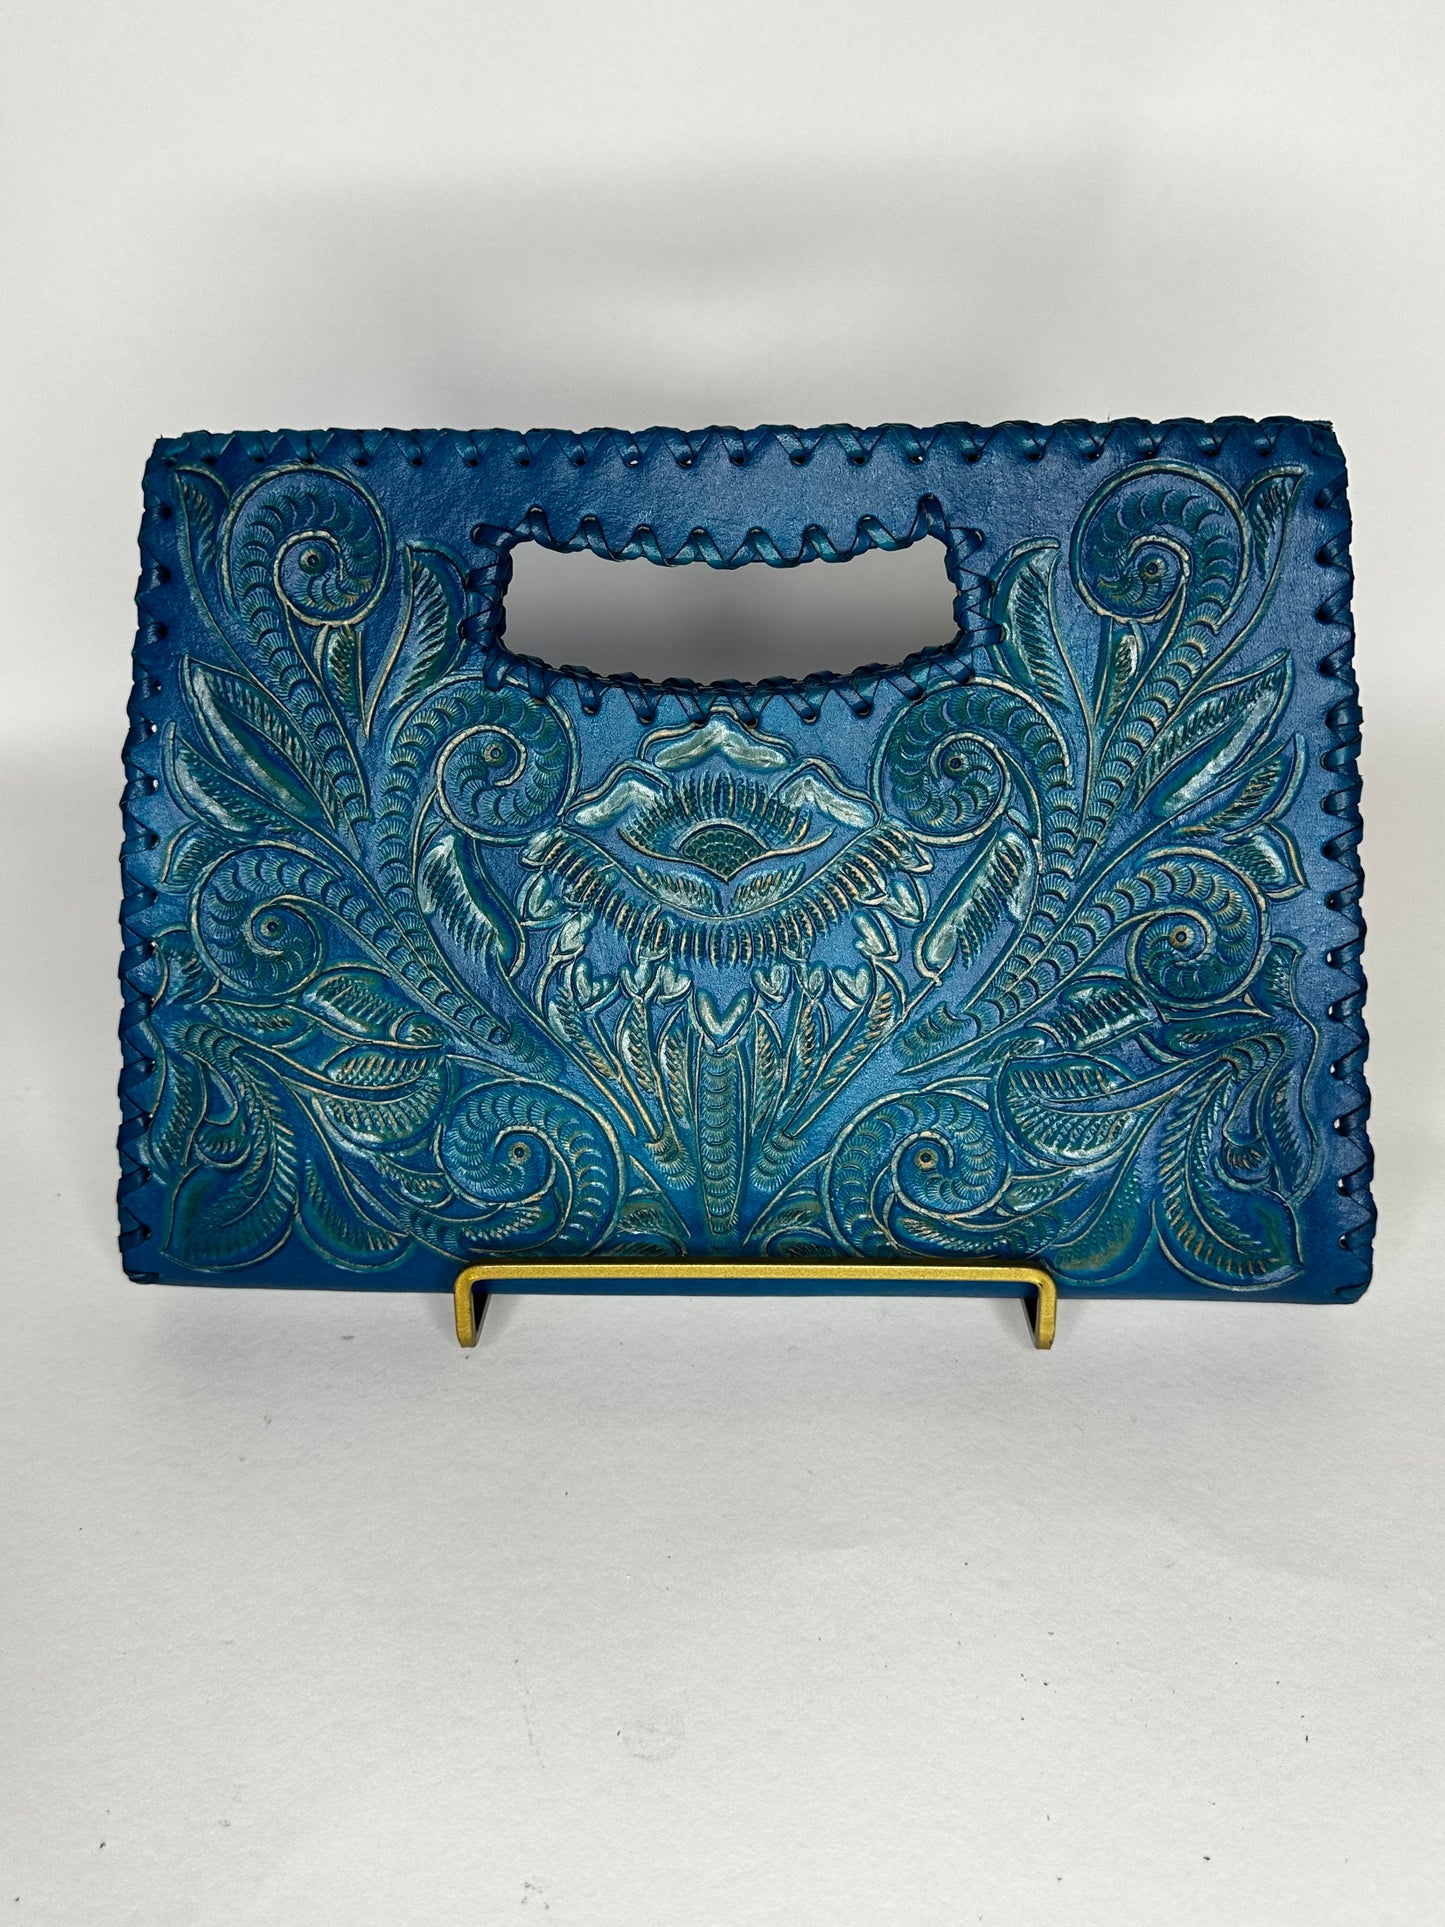 Small Mexican leather handbag with traditional design hand etched throughout the bag. Has handle mid top. leather stitching all around. Color ocean blue. 